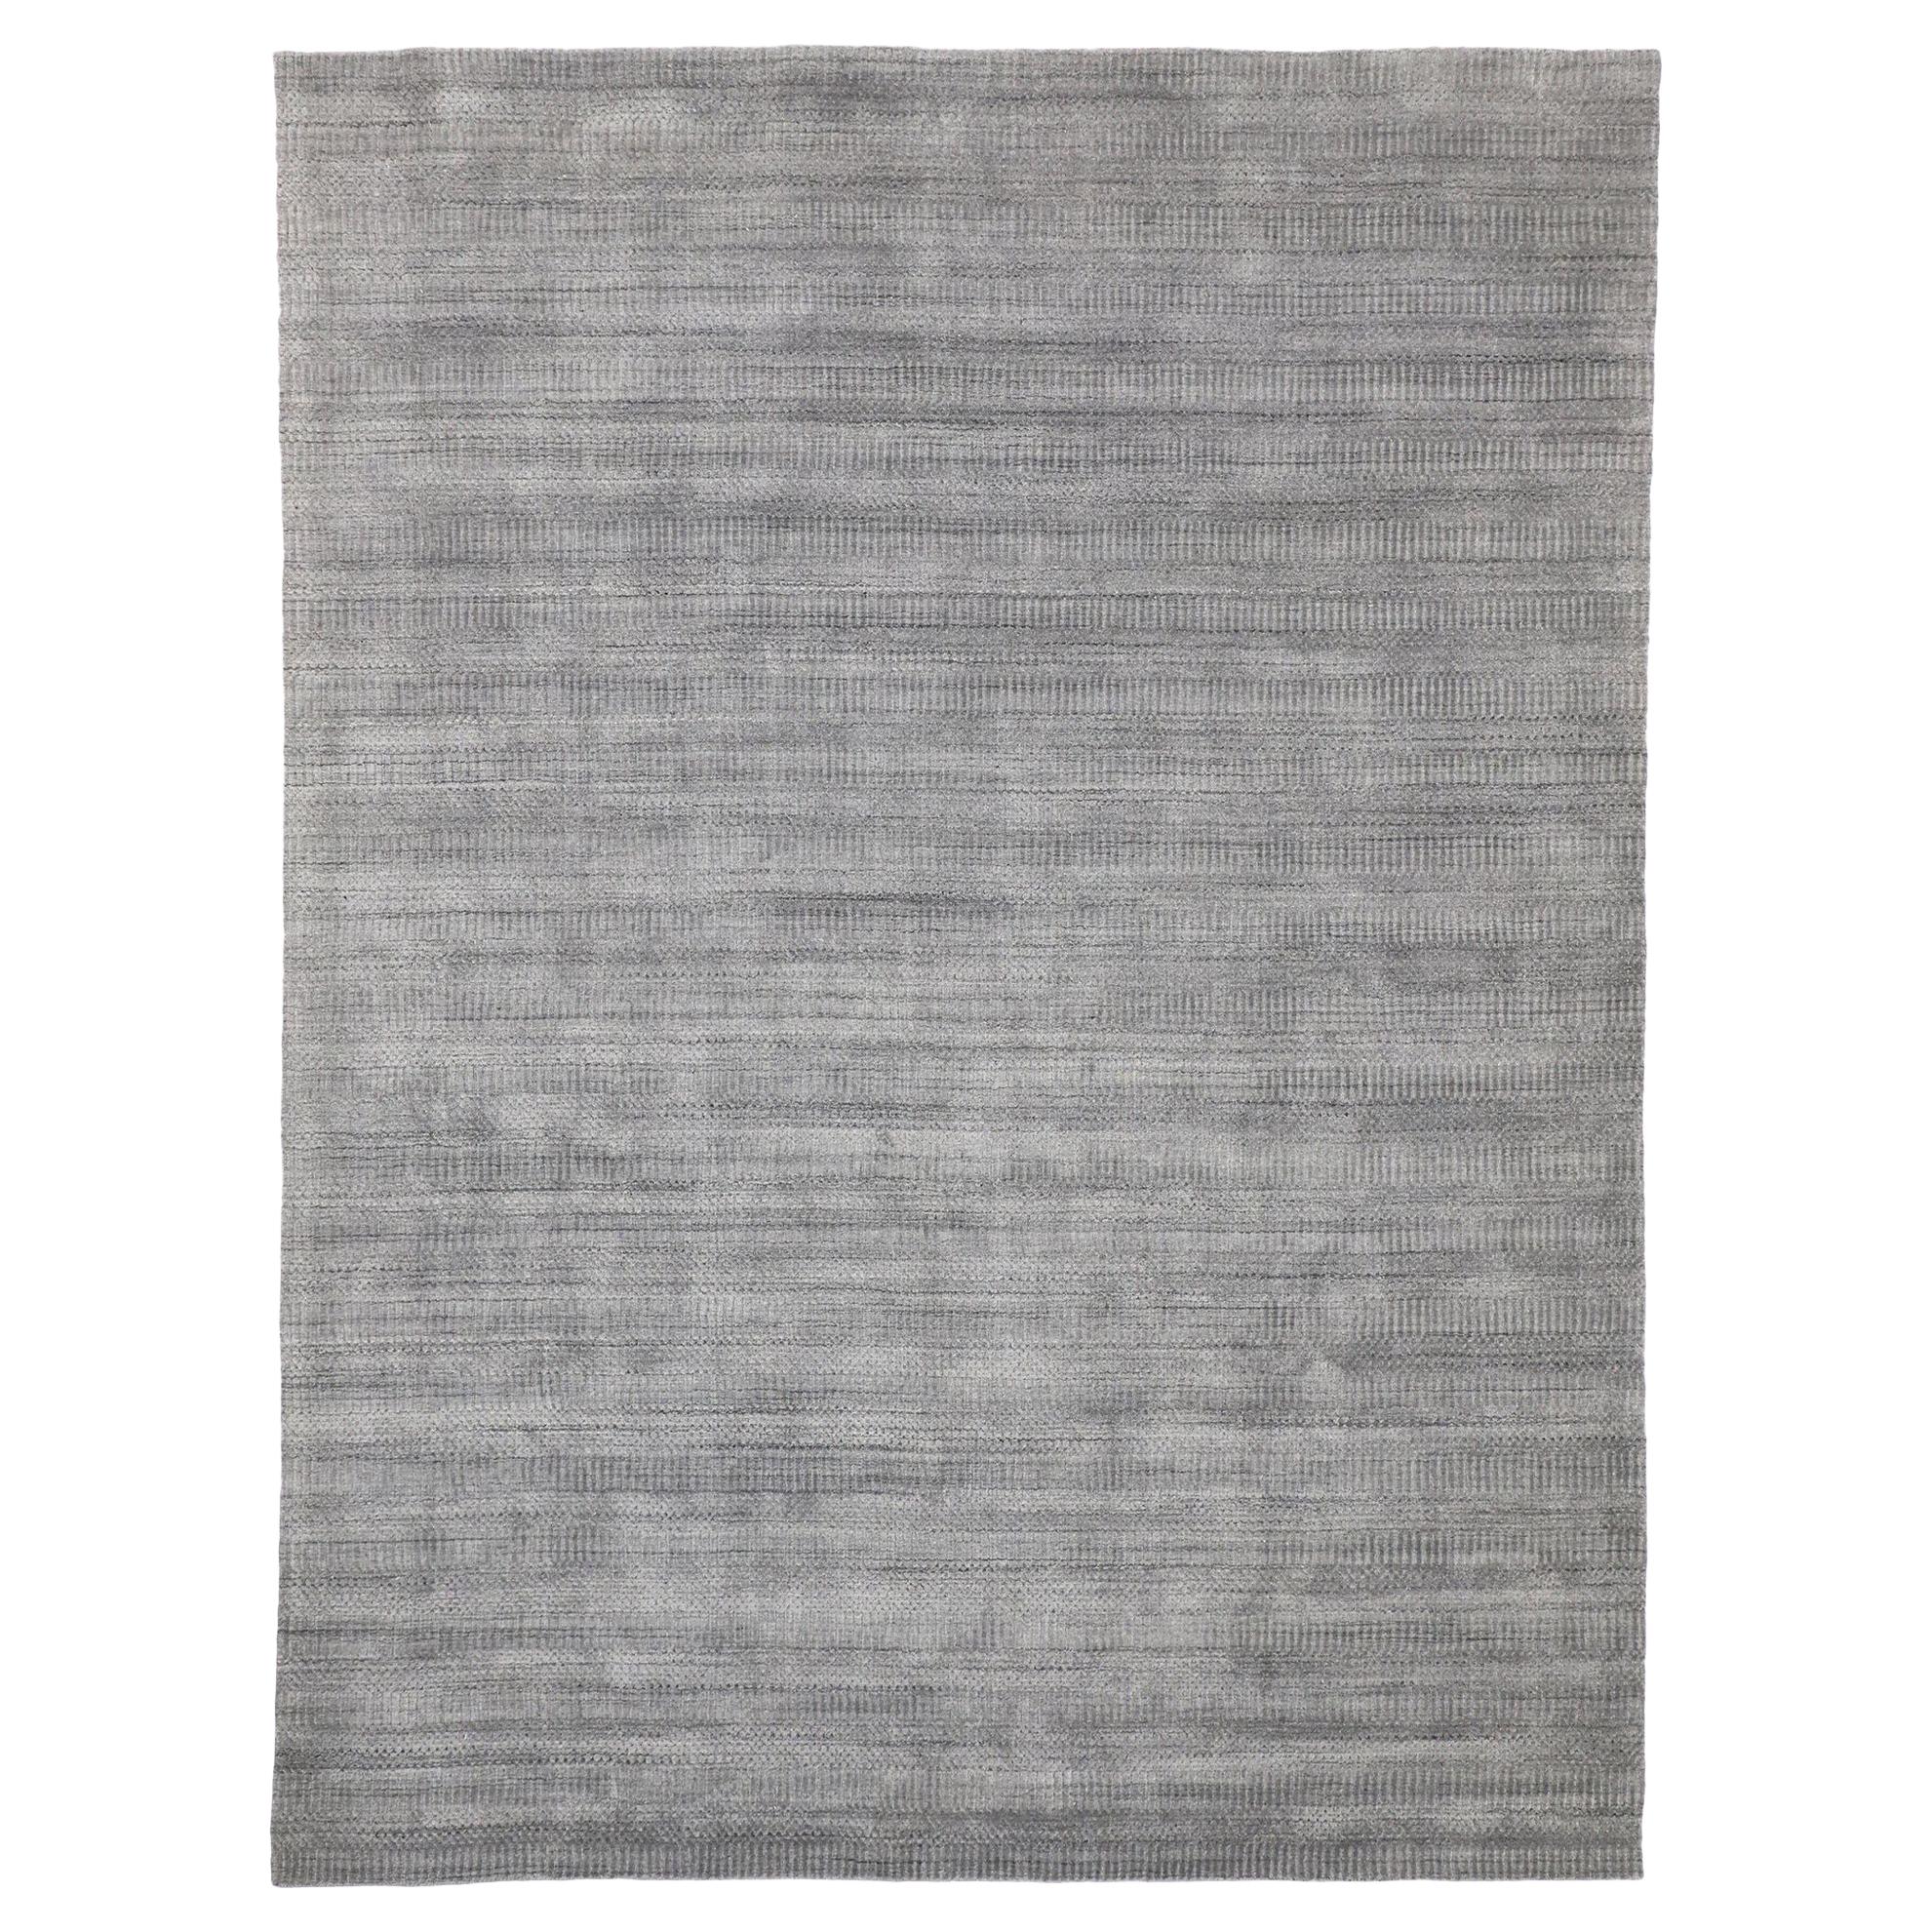 New Transitional Gray Area Rug with Modern Scandinavian Danish Style